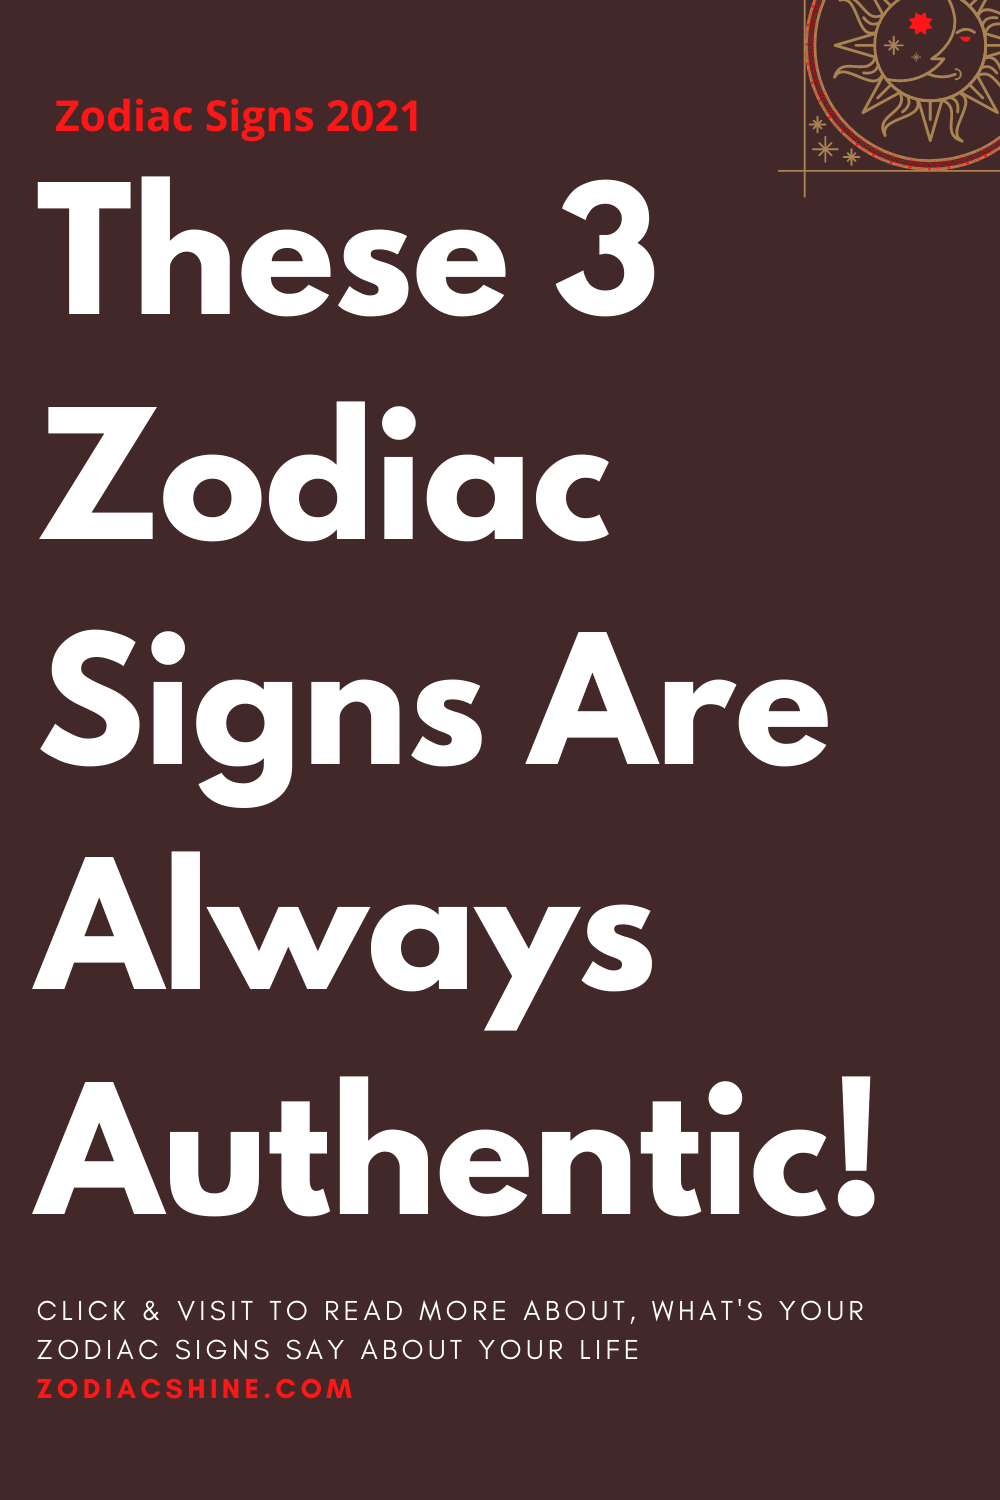 These 3 Zodiac Signs Are Always Authentic!